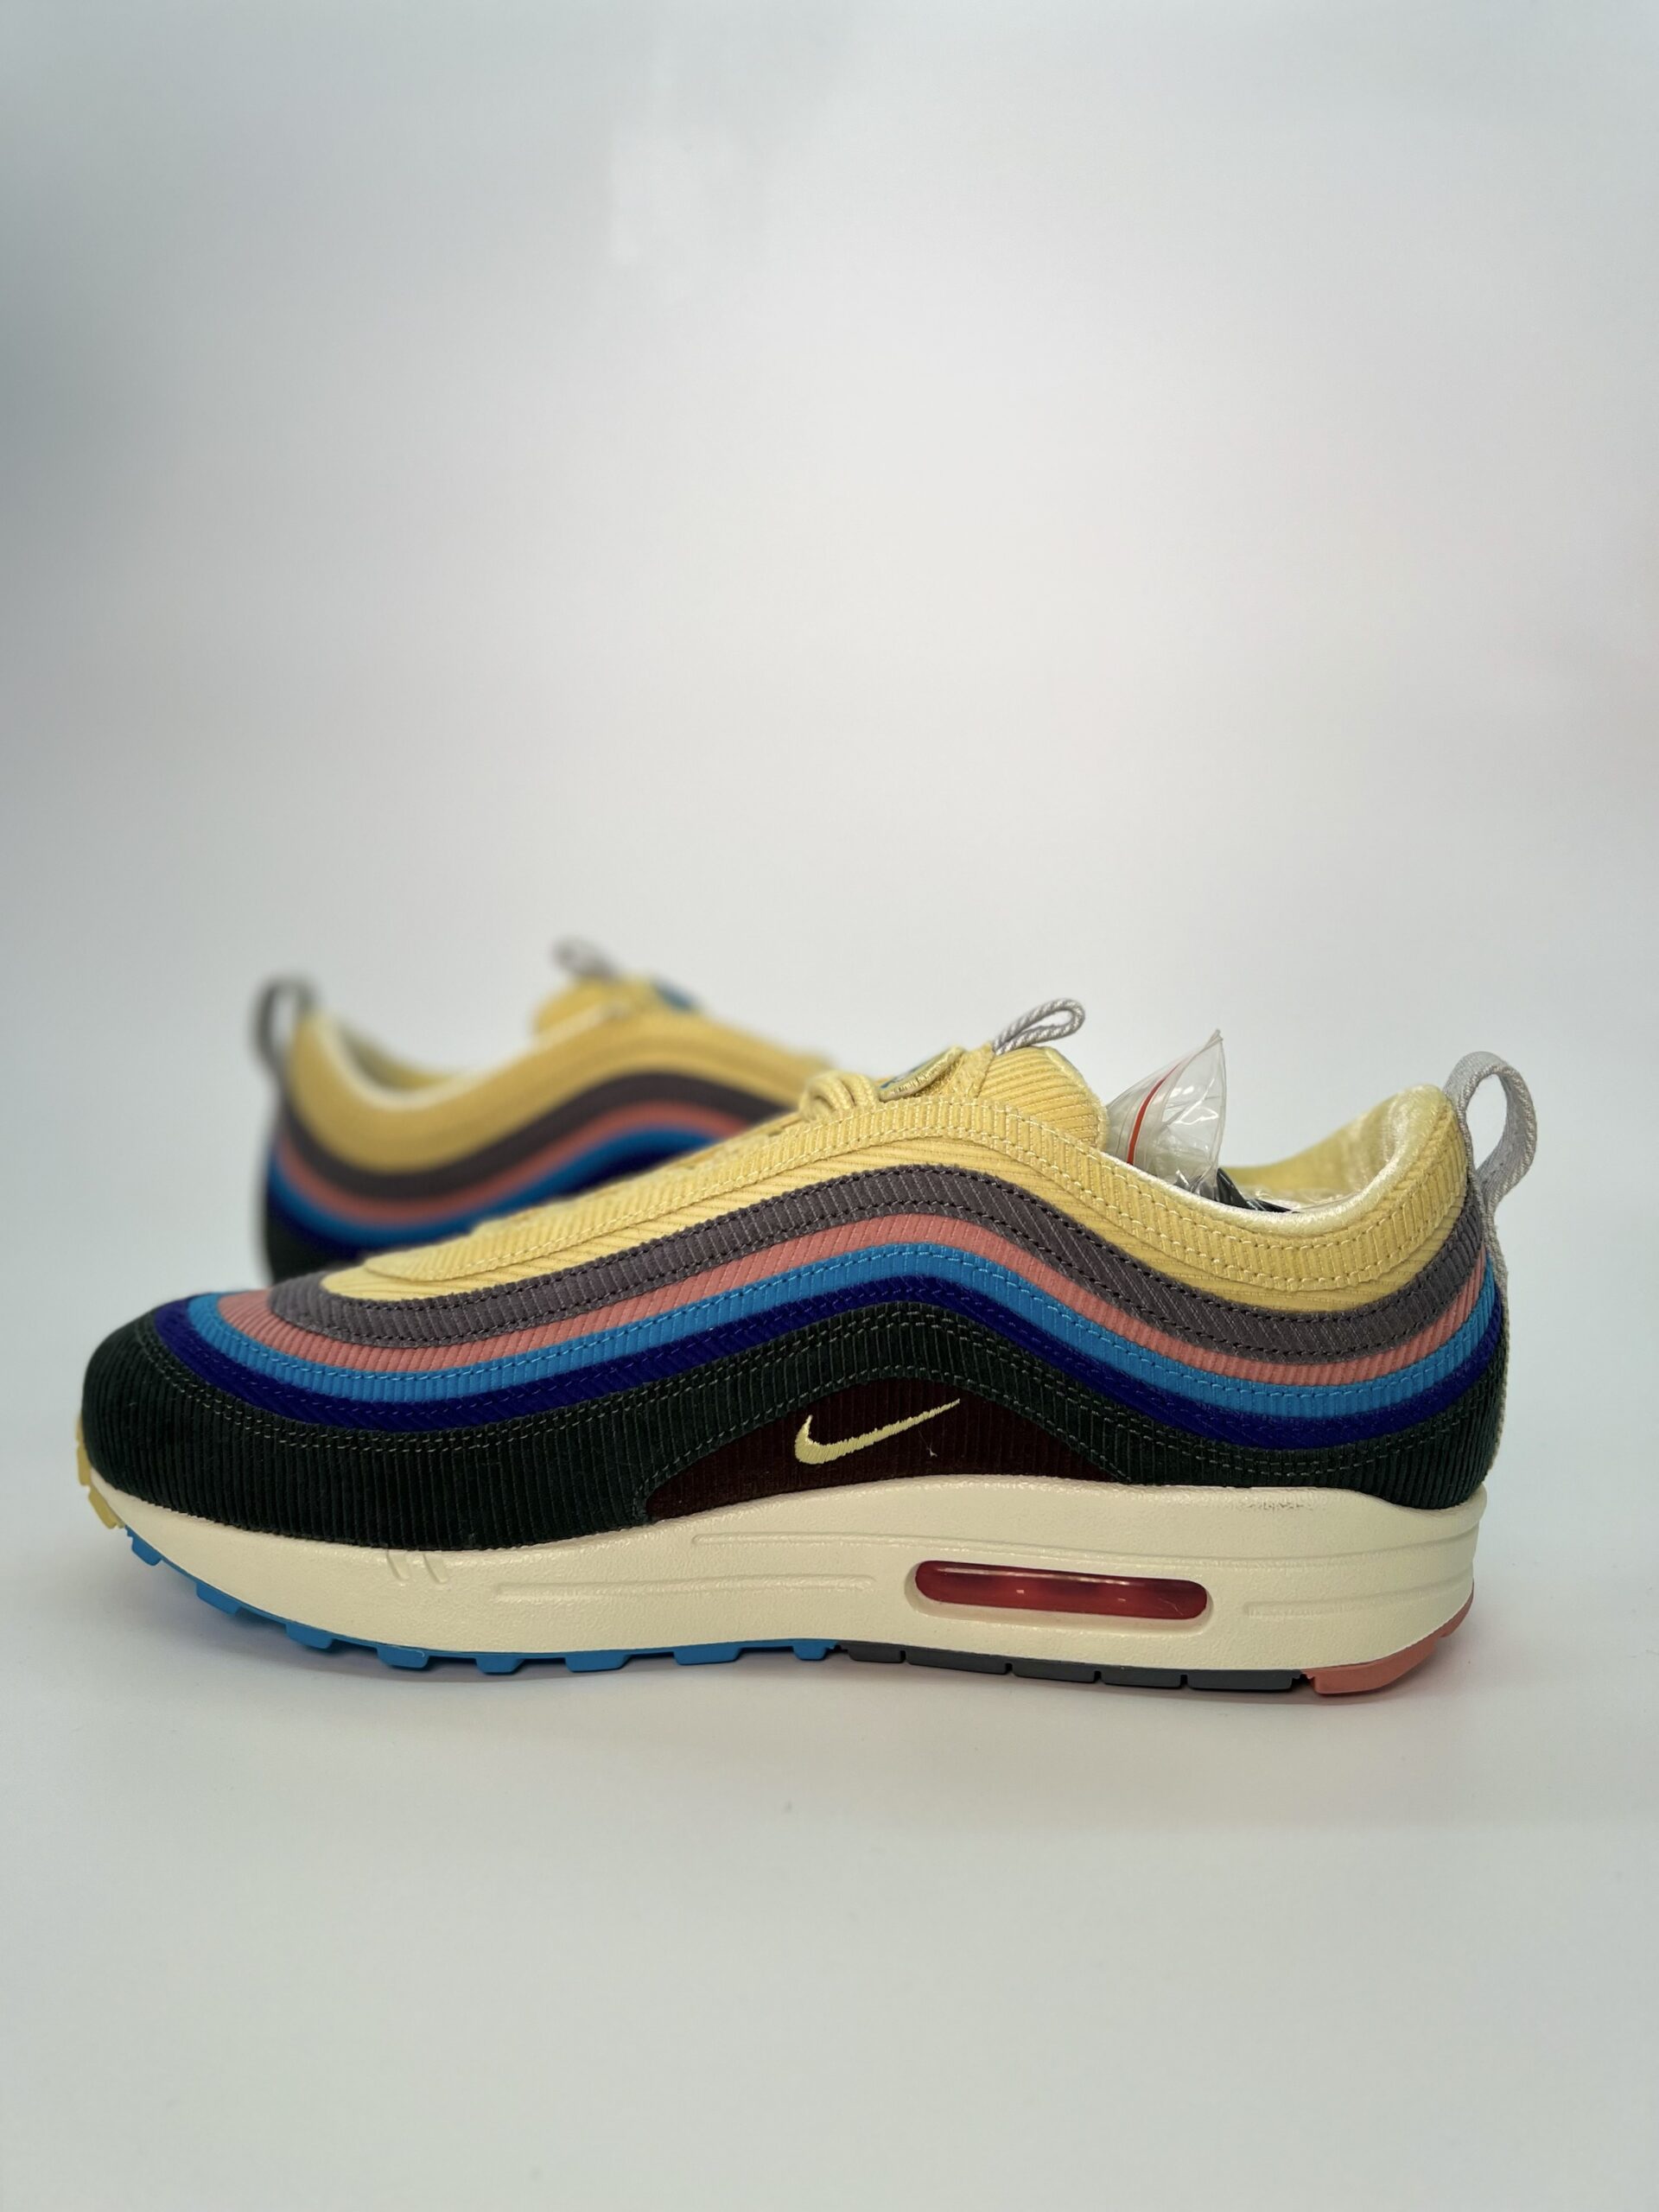 NIKE X SEAN WOTHERSPOON AIR MAX 97 UK7.5 NEW – CBEStores